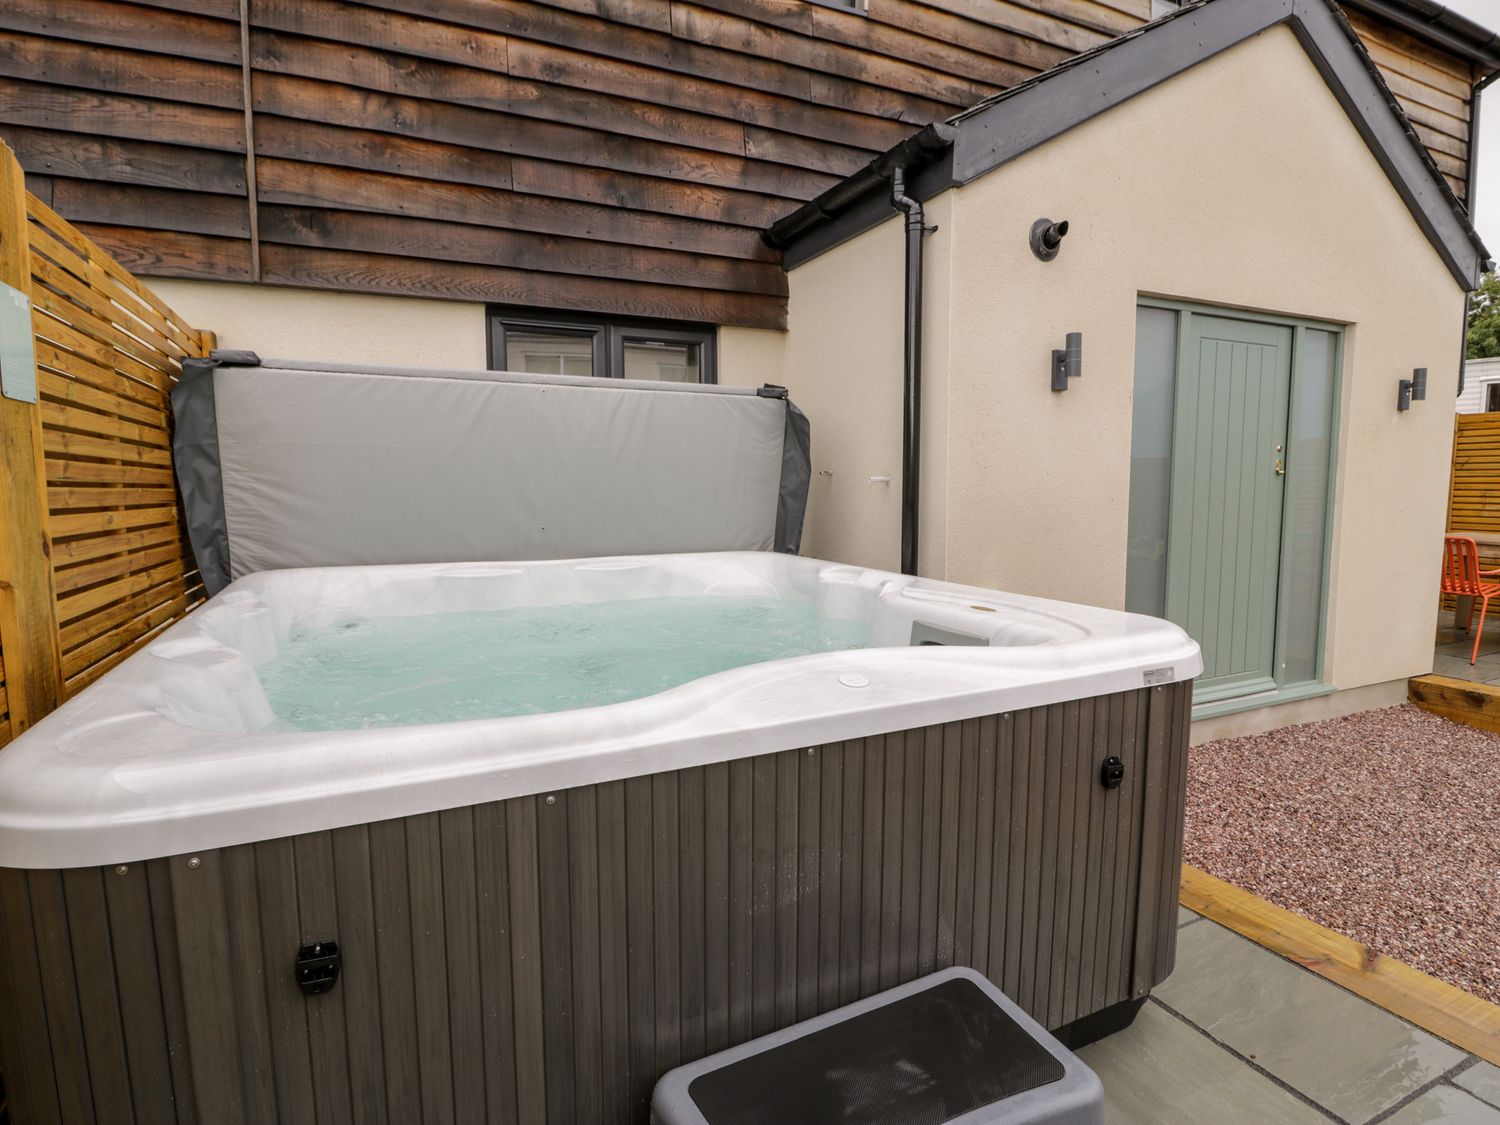 Farmyard House is in Llanfechell, Anglesey, North Wales, Near Snowdonia National Park, Hot tub, 3bed